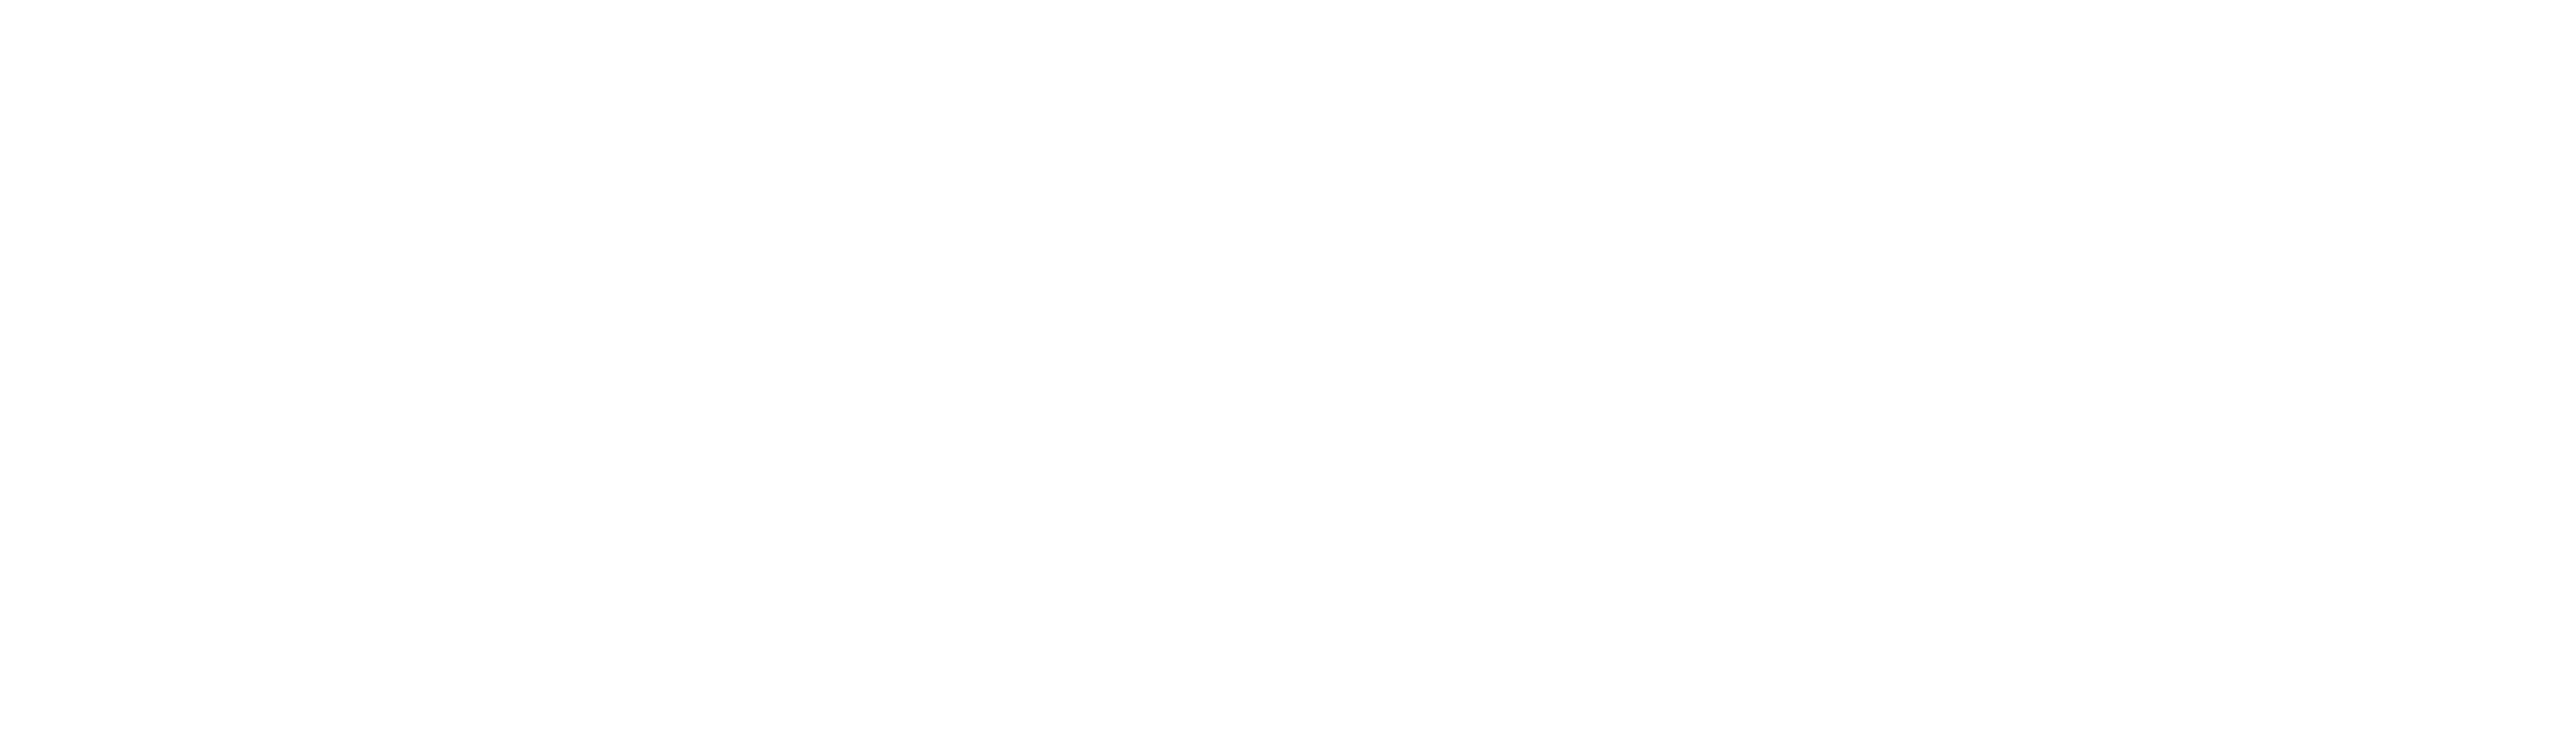 Long, Intertwined Animals: Celtic Stencils by Co Spinhoven on Granite Bay Graphic Design